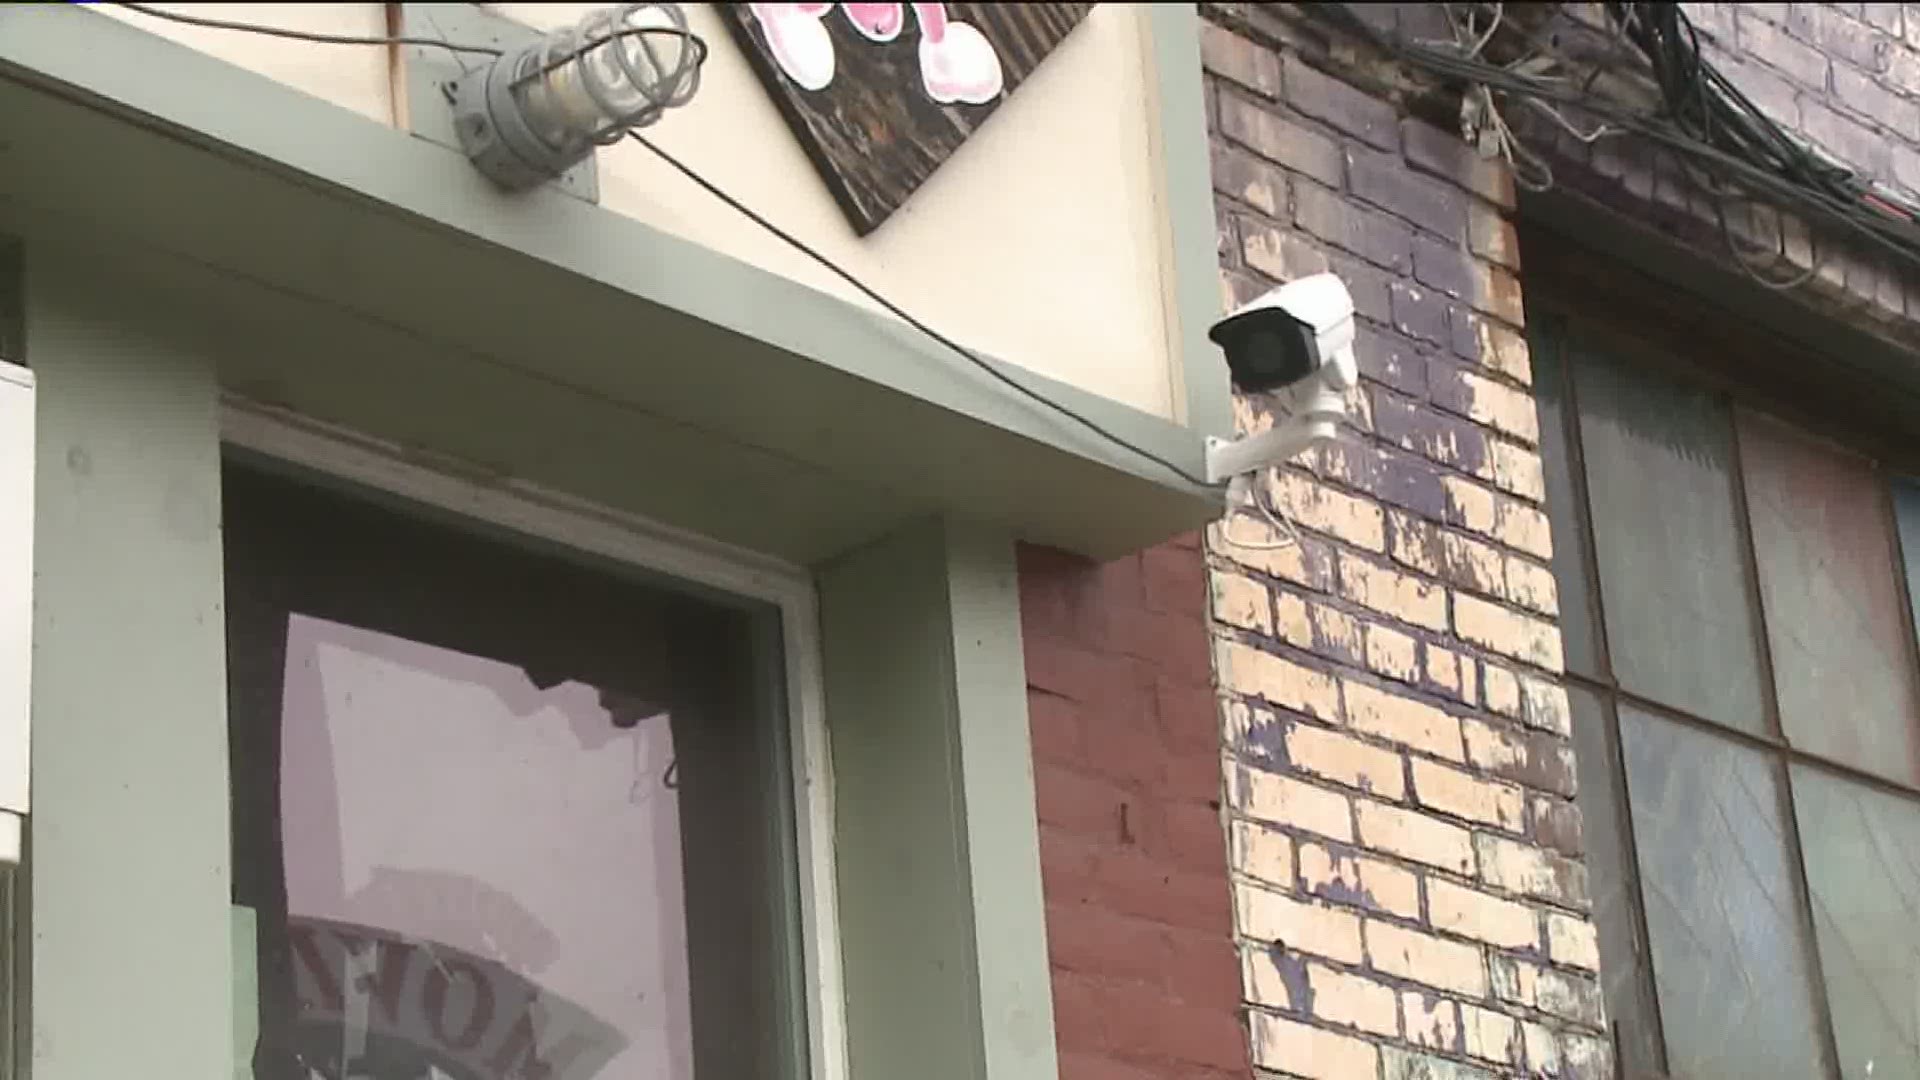 Wilkes-Barre police hope homes and businesses will sign up to become a part a video surveillance network.